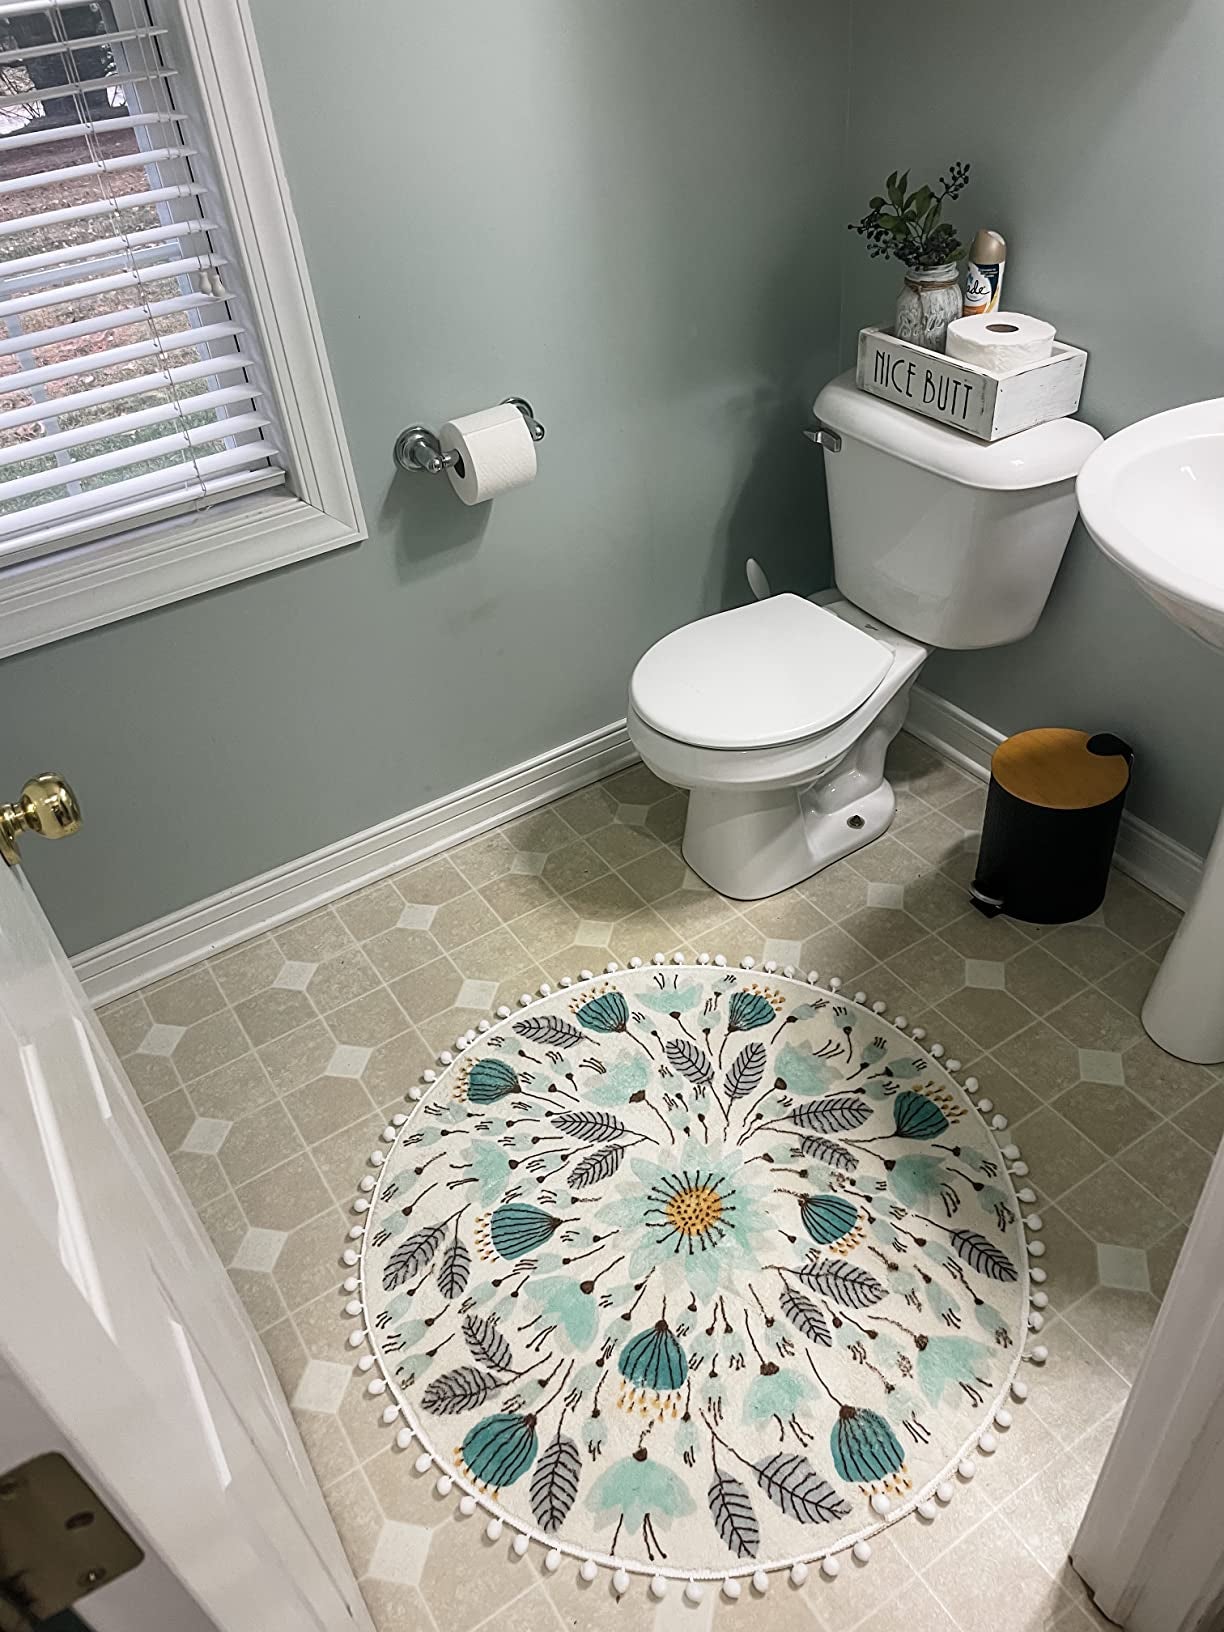 A circular rug with flowers and leaves on it, placed in a bathroom